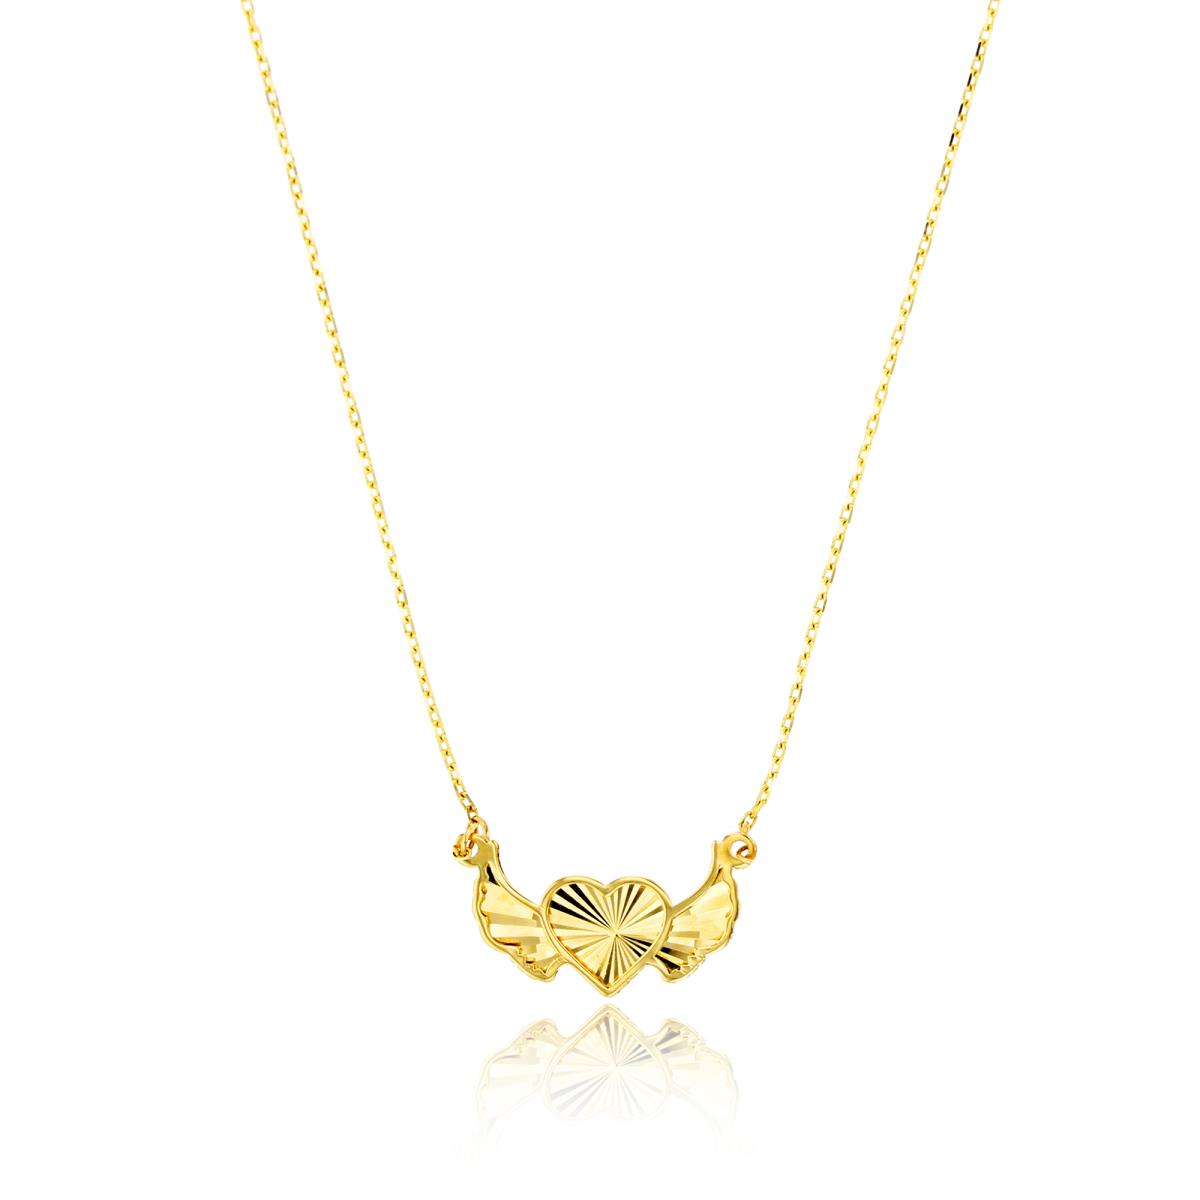 14K Yellow Gold DC Heart with Wings 16"+1"Necklace